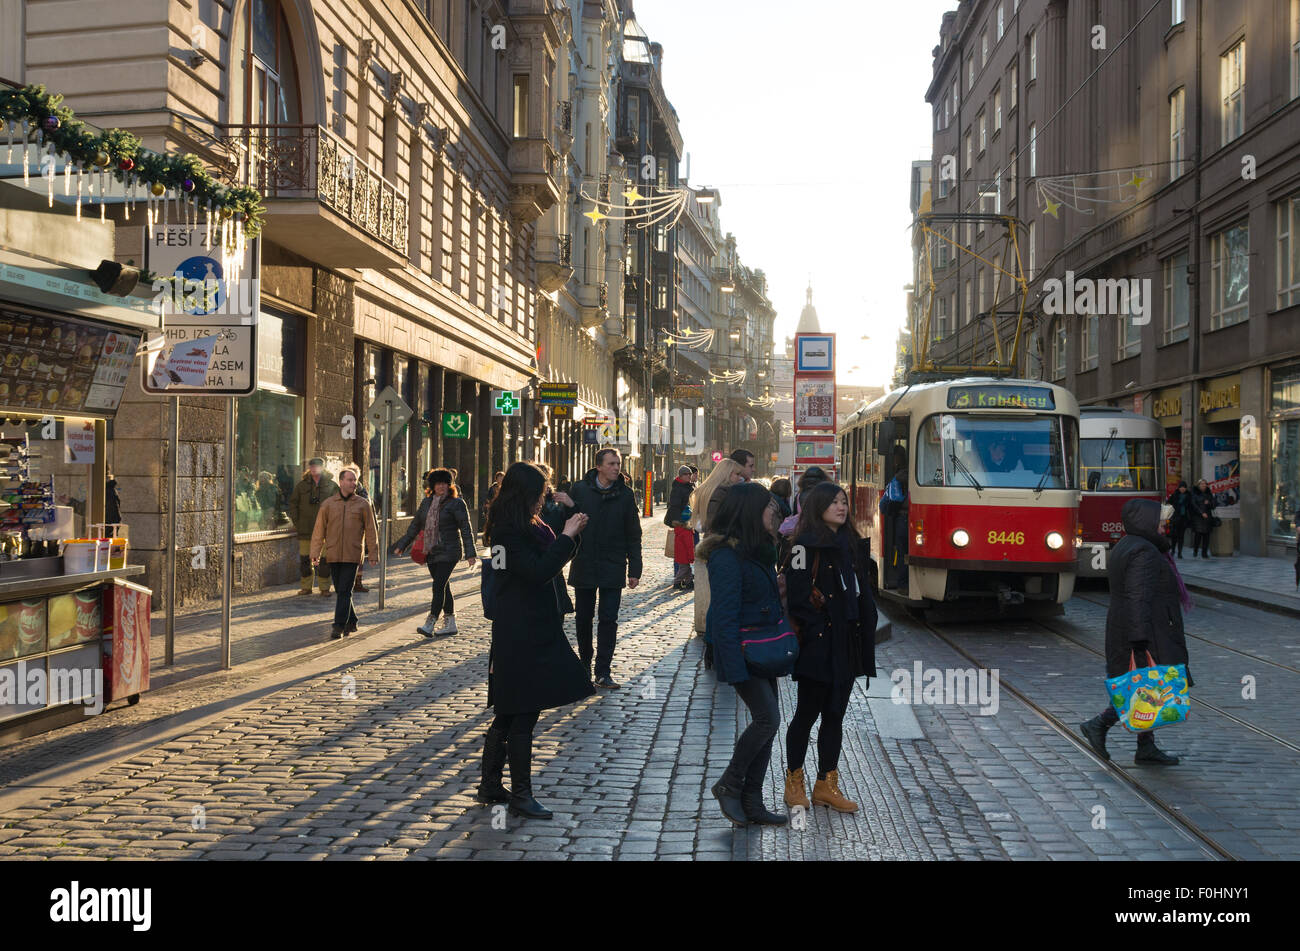 Unknown people in the streets of Prague with a typical tram or cable car in the background Stock Photo